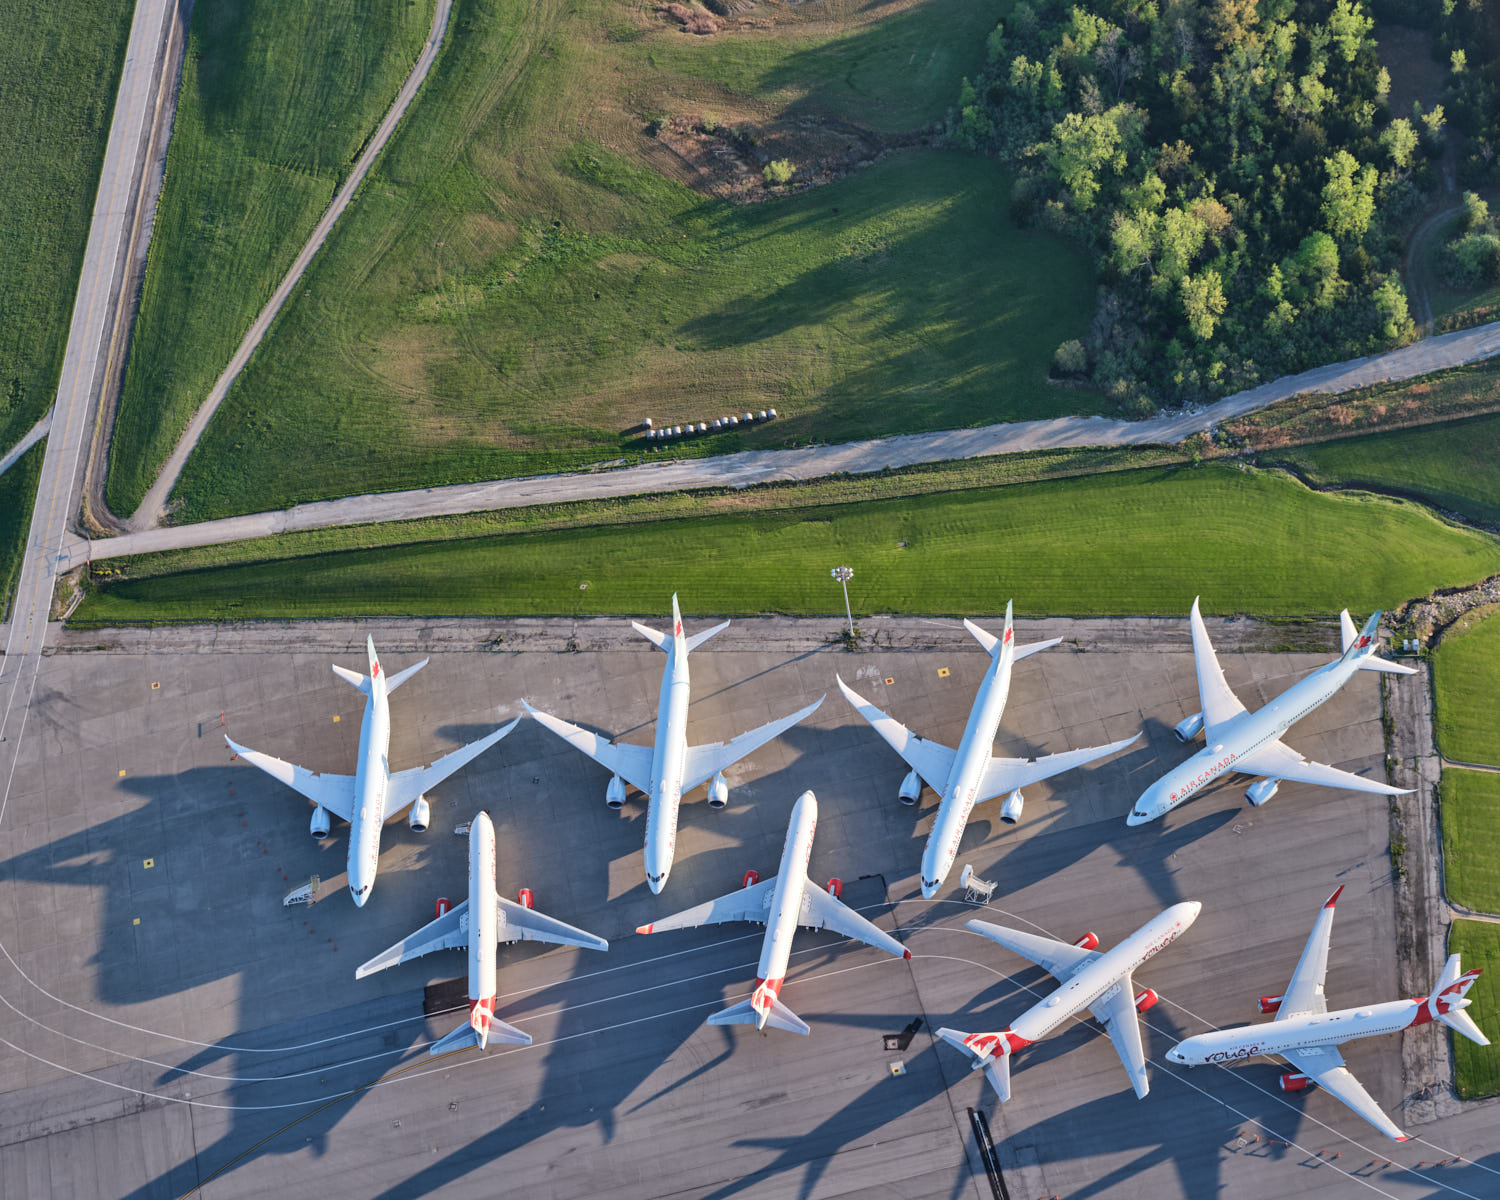 a group of white airplanes on a runway